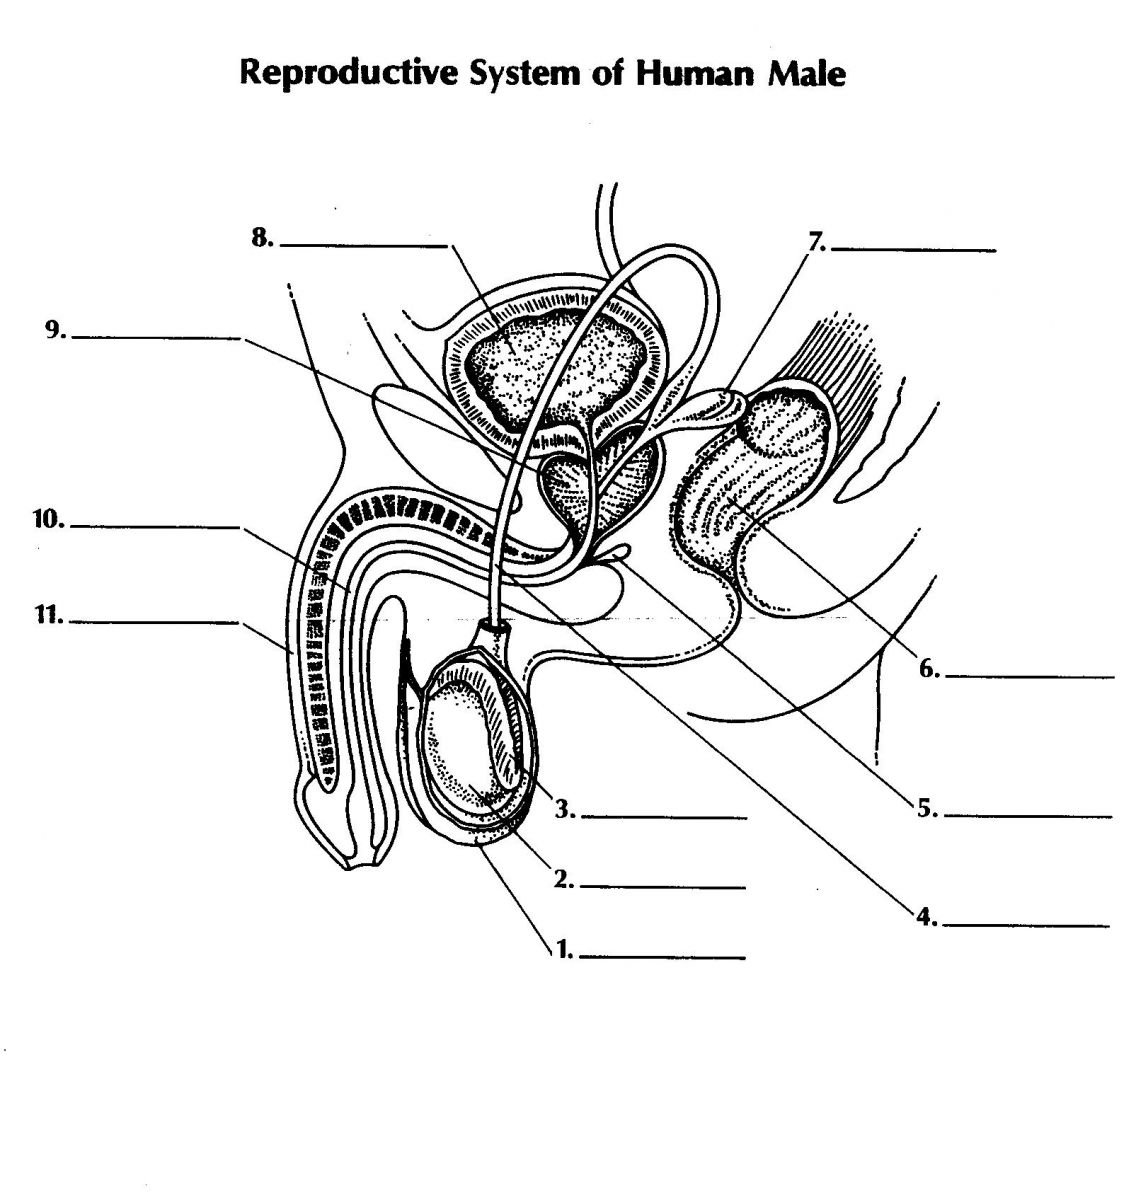 Reproductive System Quizzes Trivia Questions And Answers Proprofs Quizzes